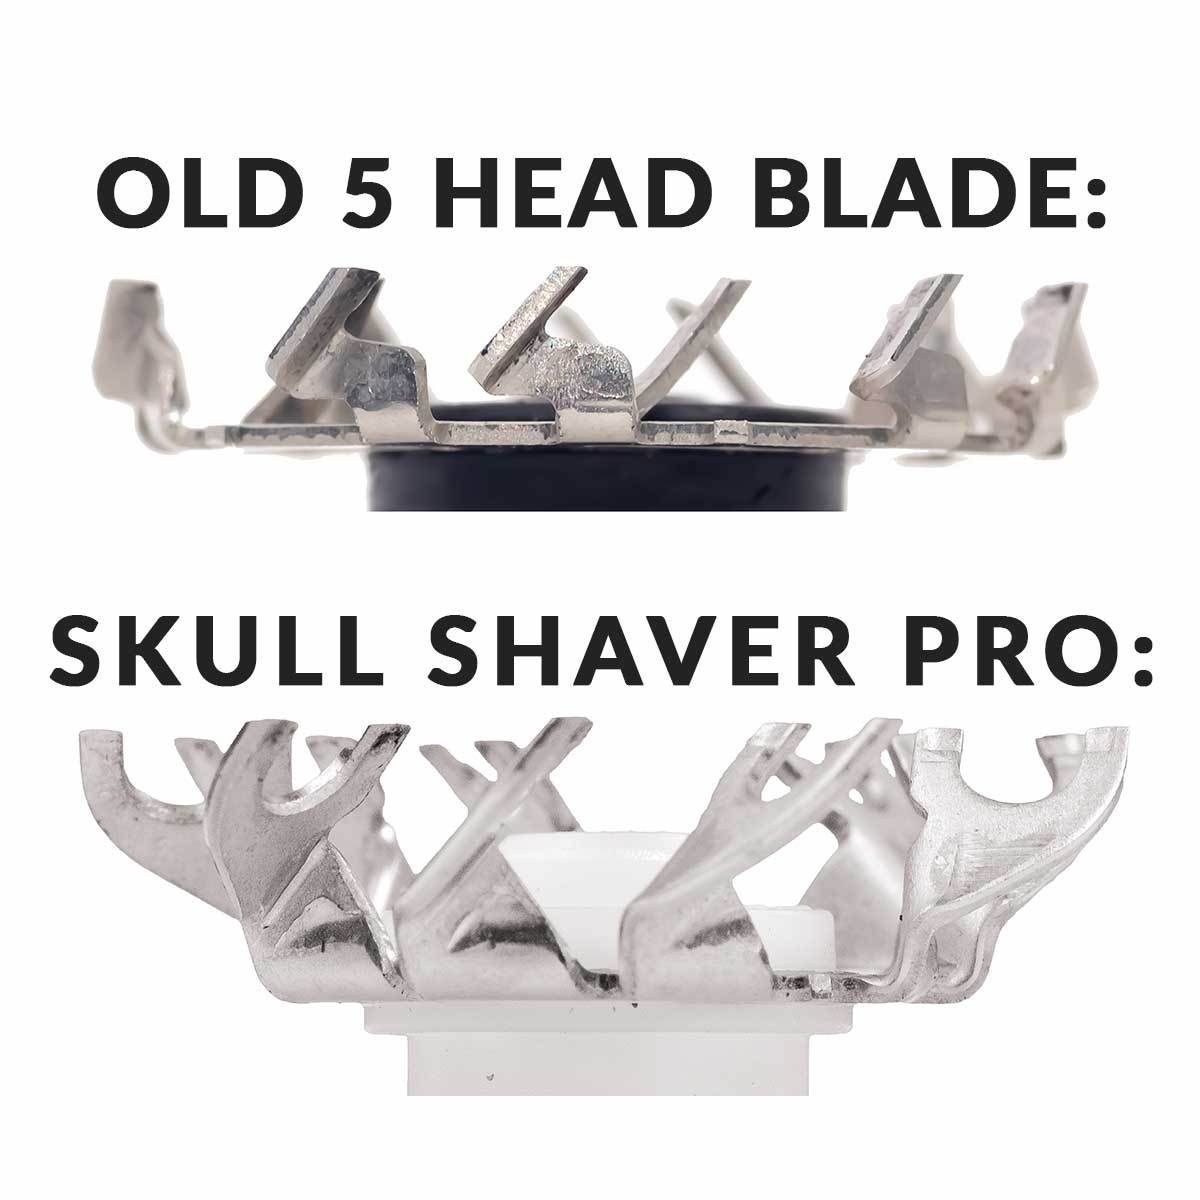 A picture showing side by side comparison of the old 5 head blade with the new Skull shaver pro blades